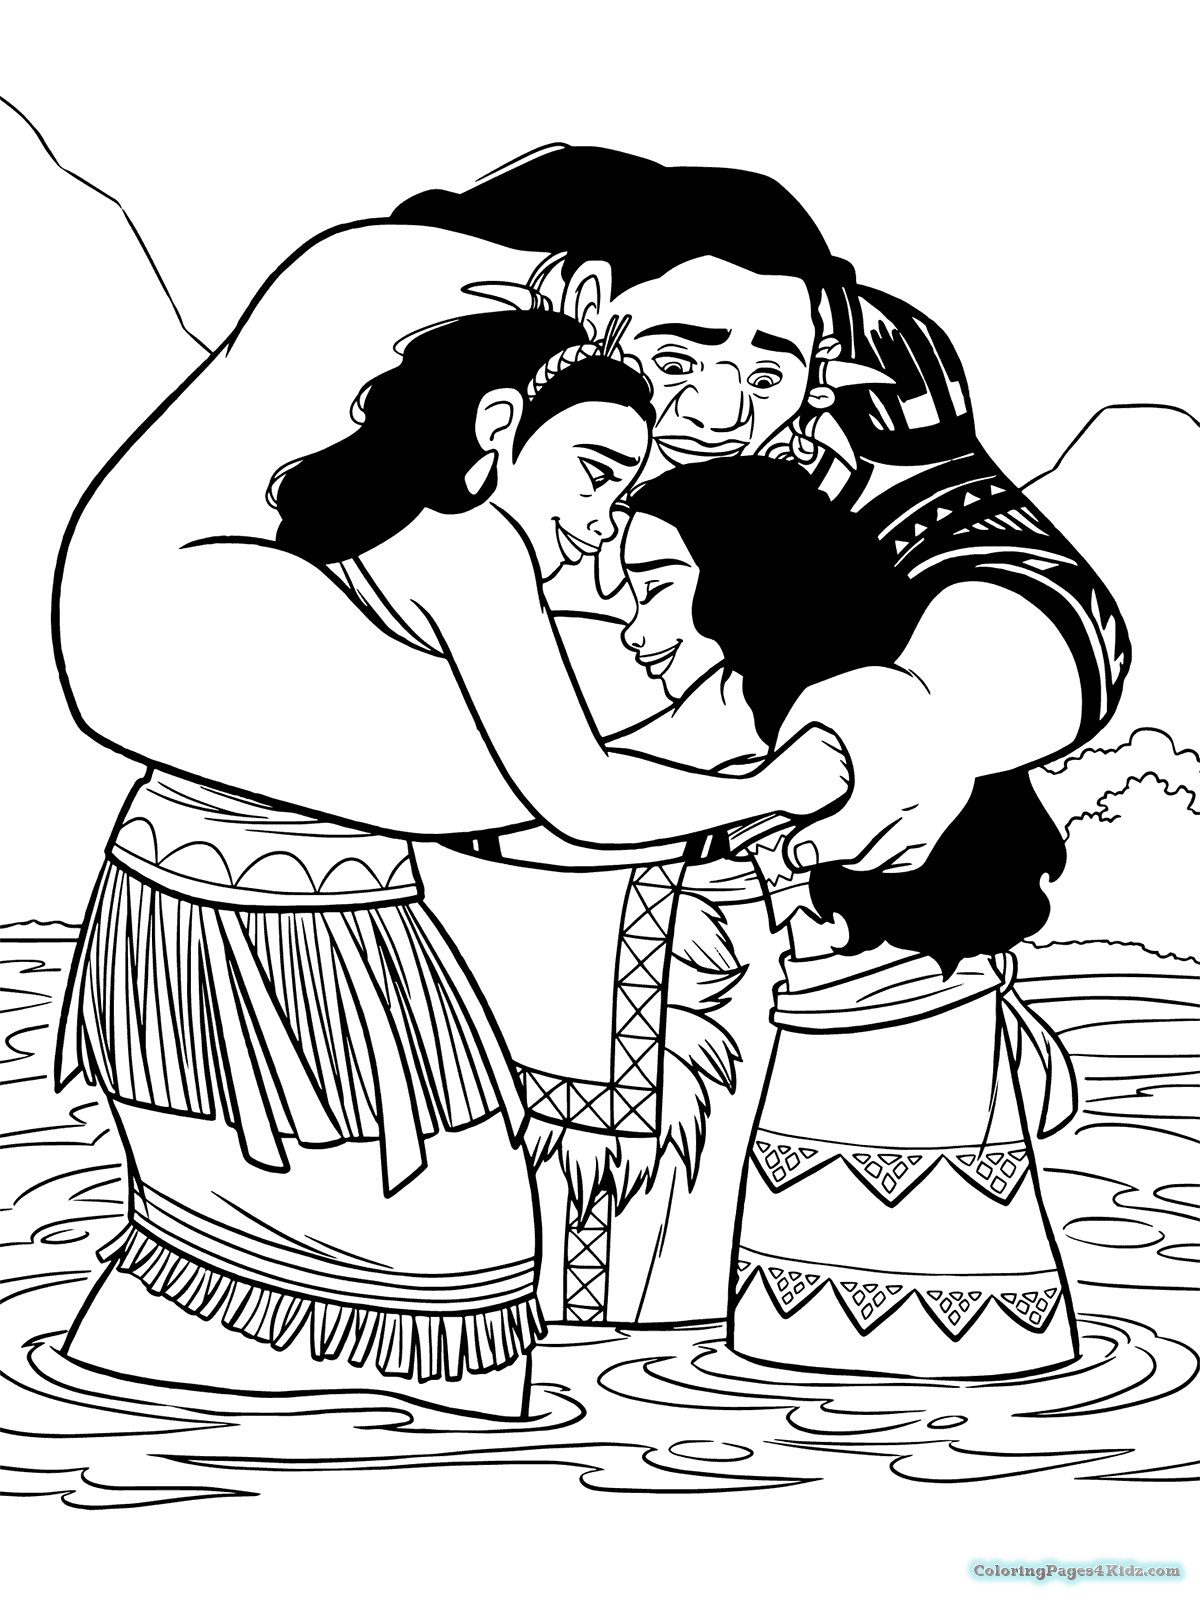 Baby Moana Coloring Page
 Coloring Pages Baby Moana Easy